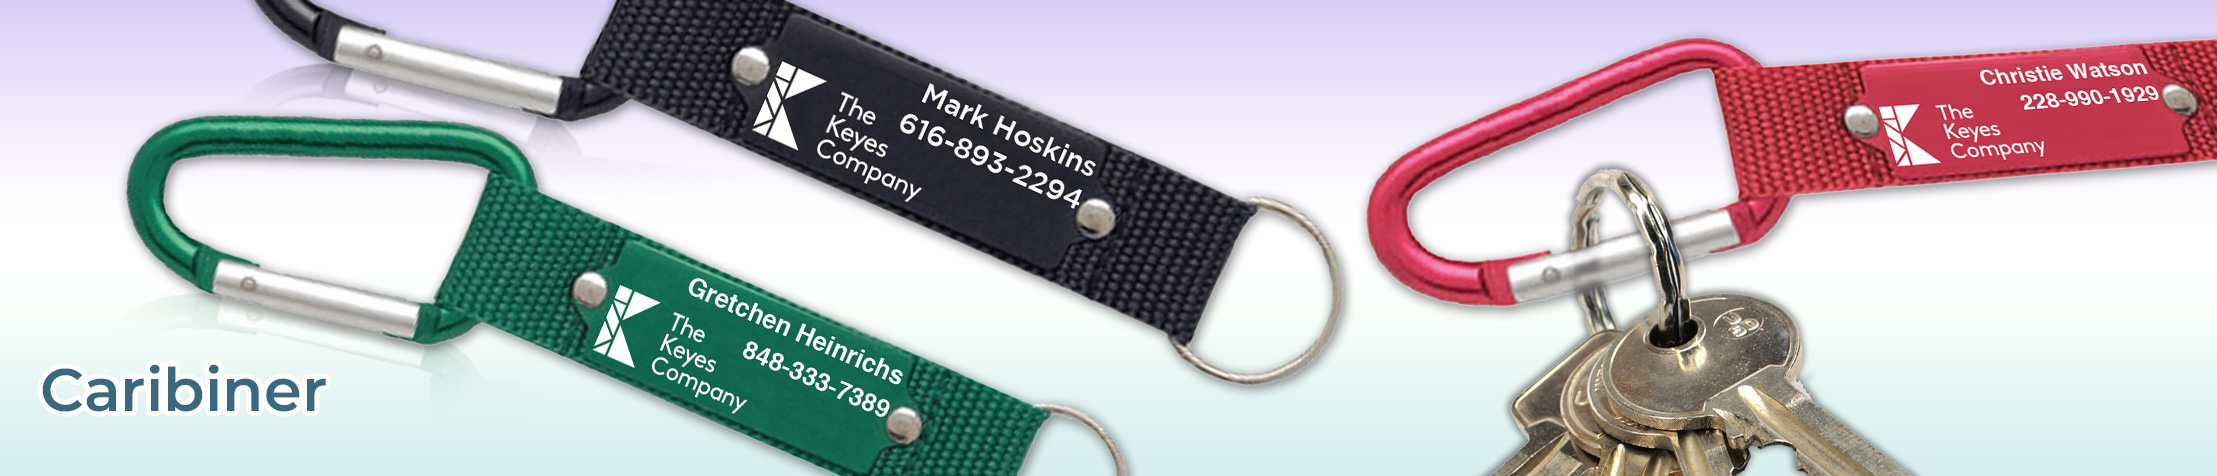 The Keyes Company Real Estate Carabiner - The Keyes Company  personalized realtor promotional products | BestPrintBuy.com